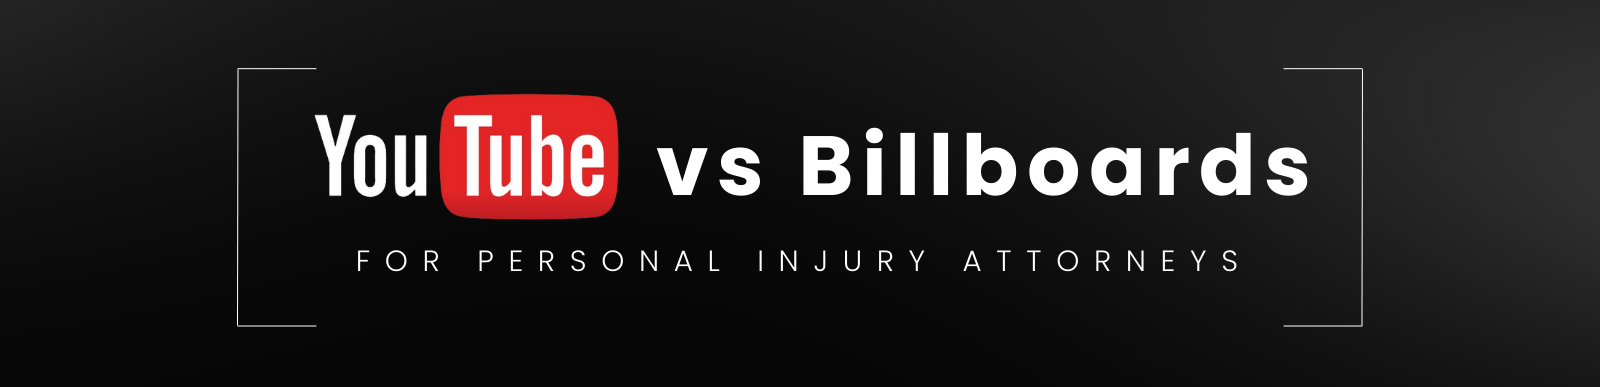 YouTube vs Billboards ads For Personal Injury Attorneys